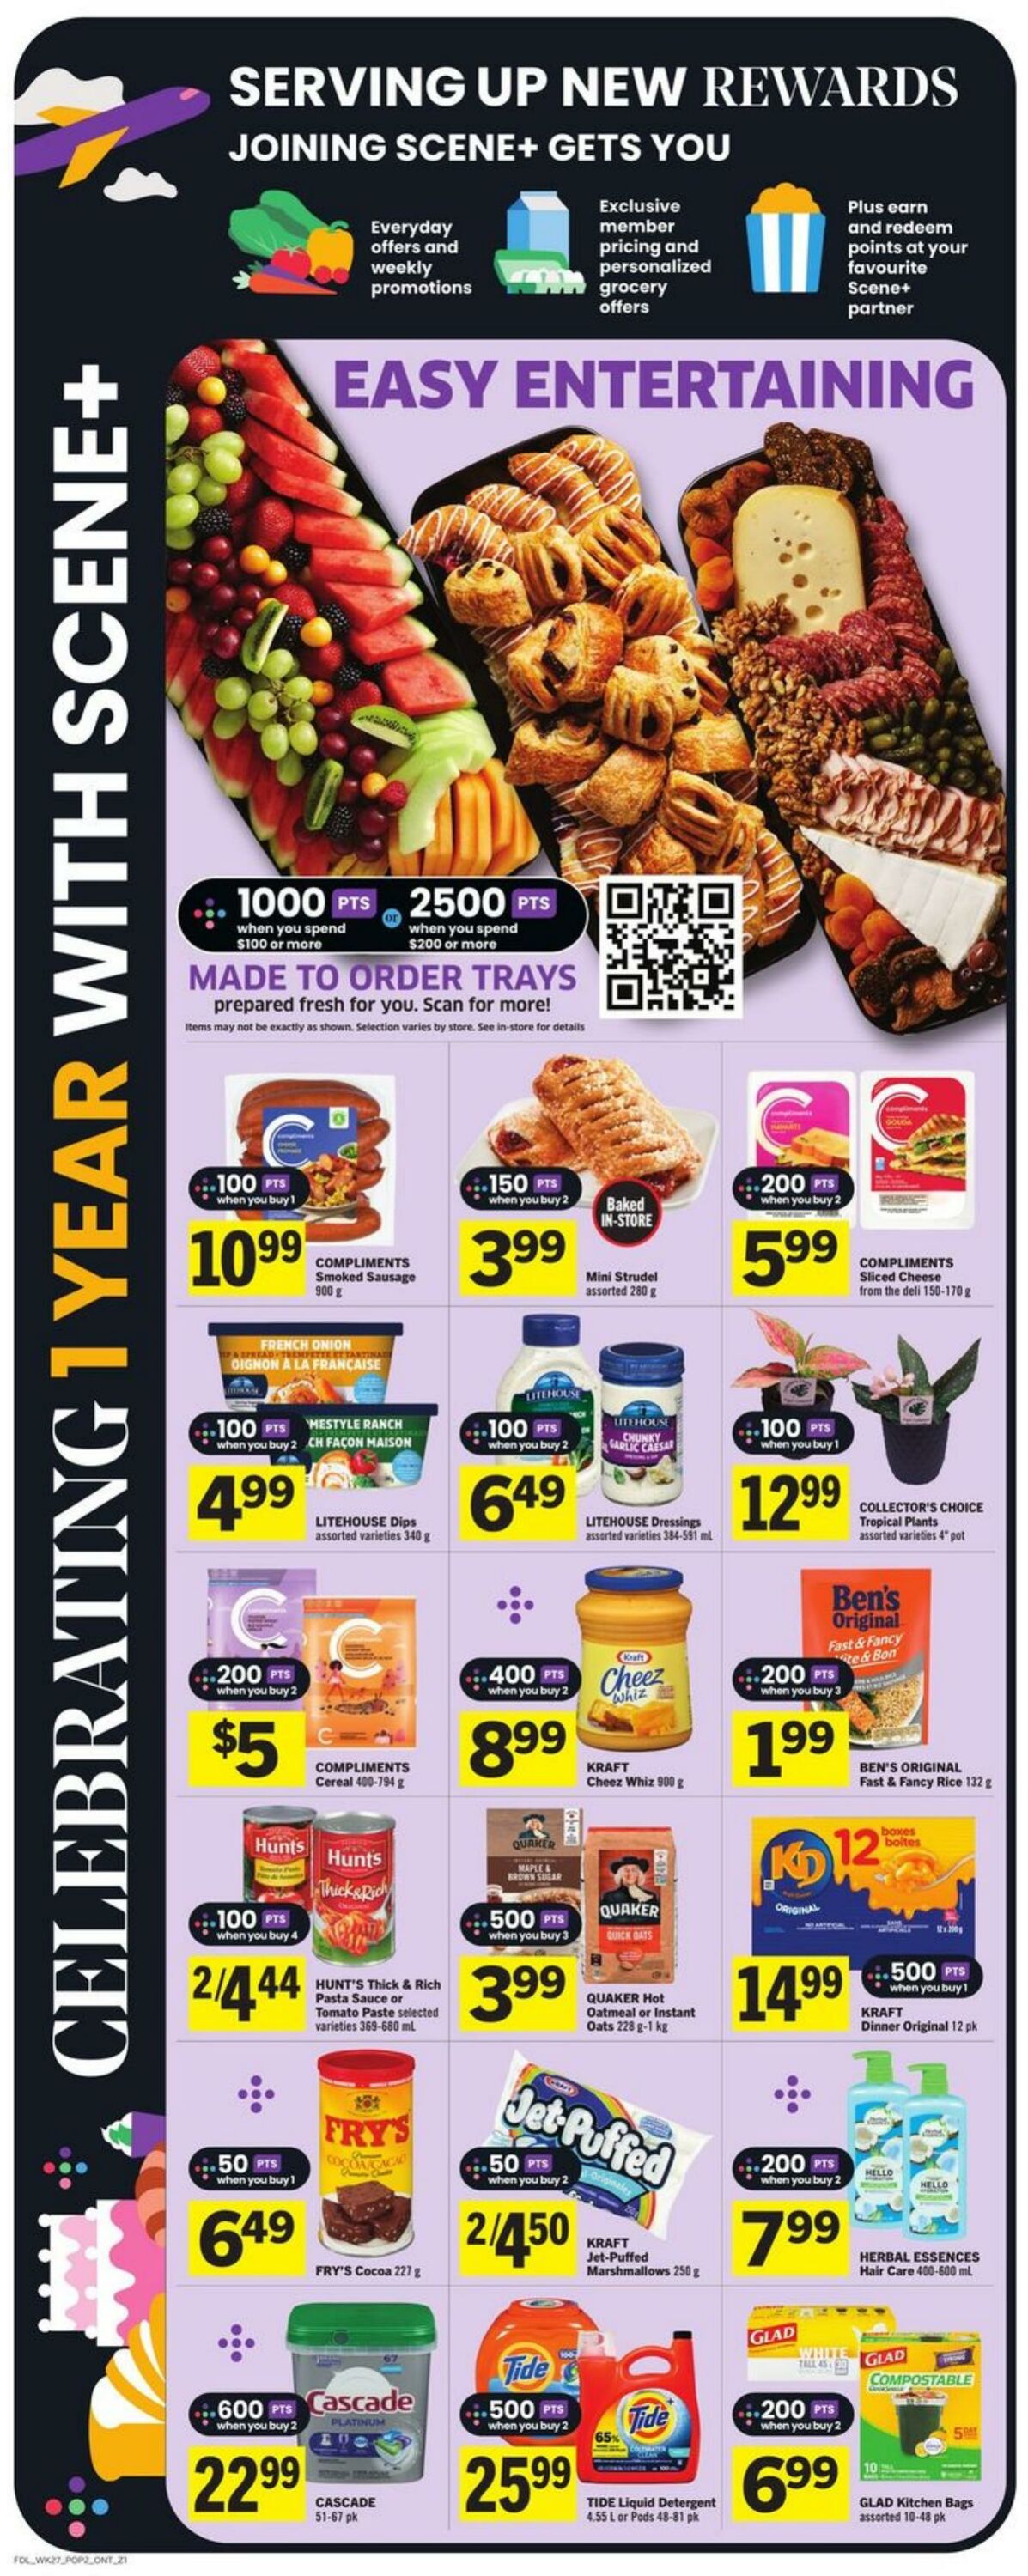 Foodland Flyer from 11/02/2023